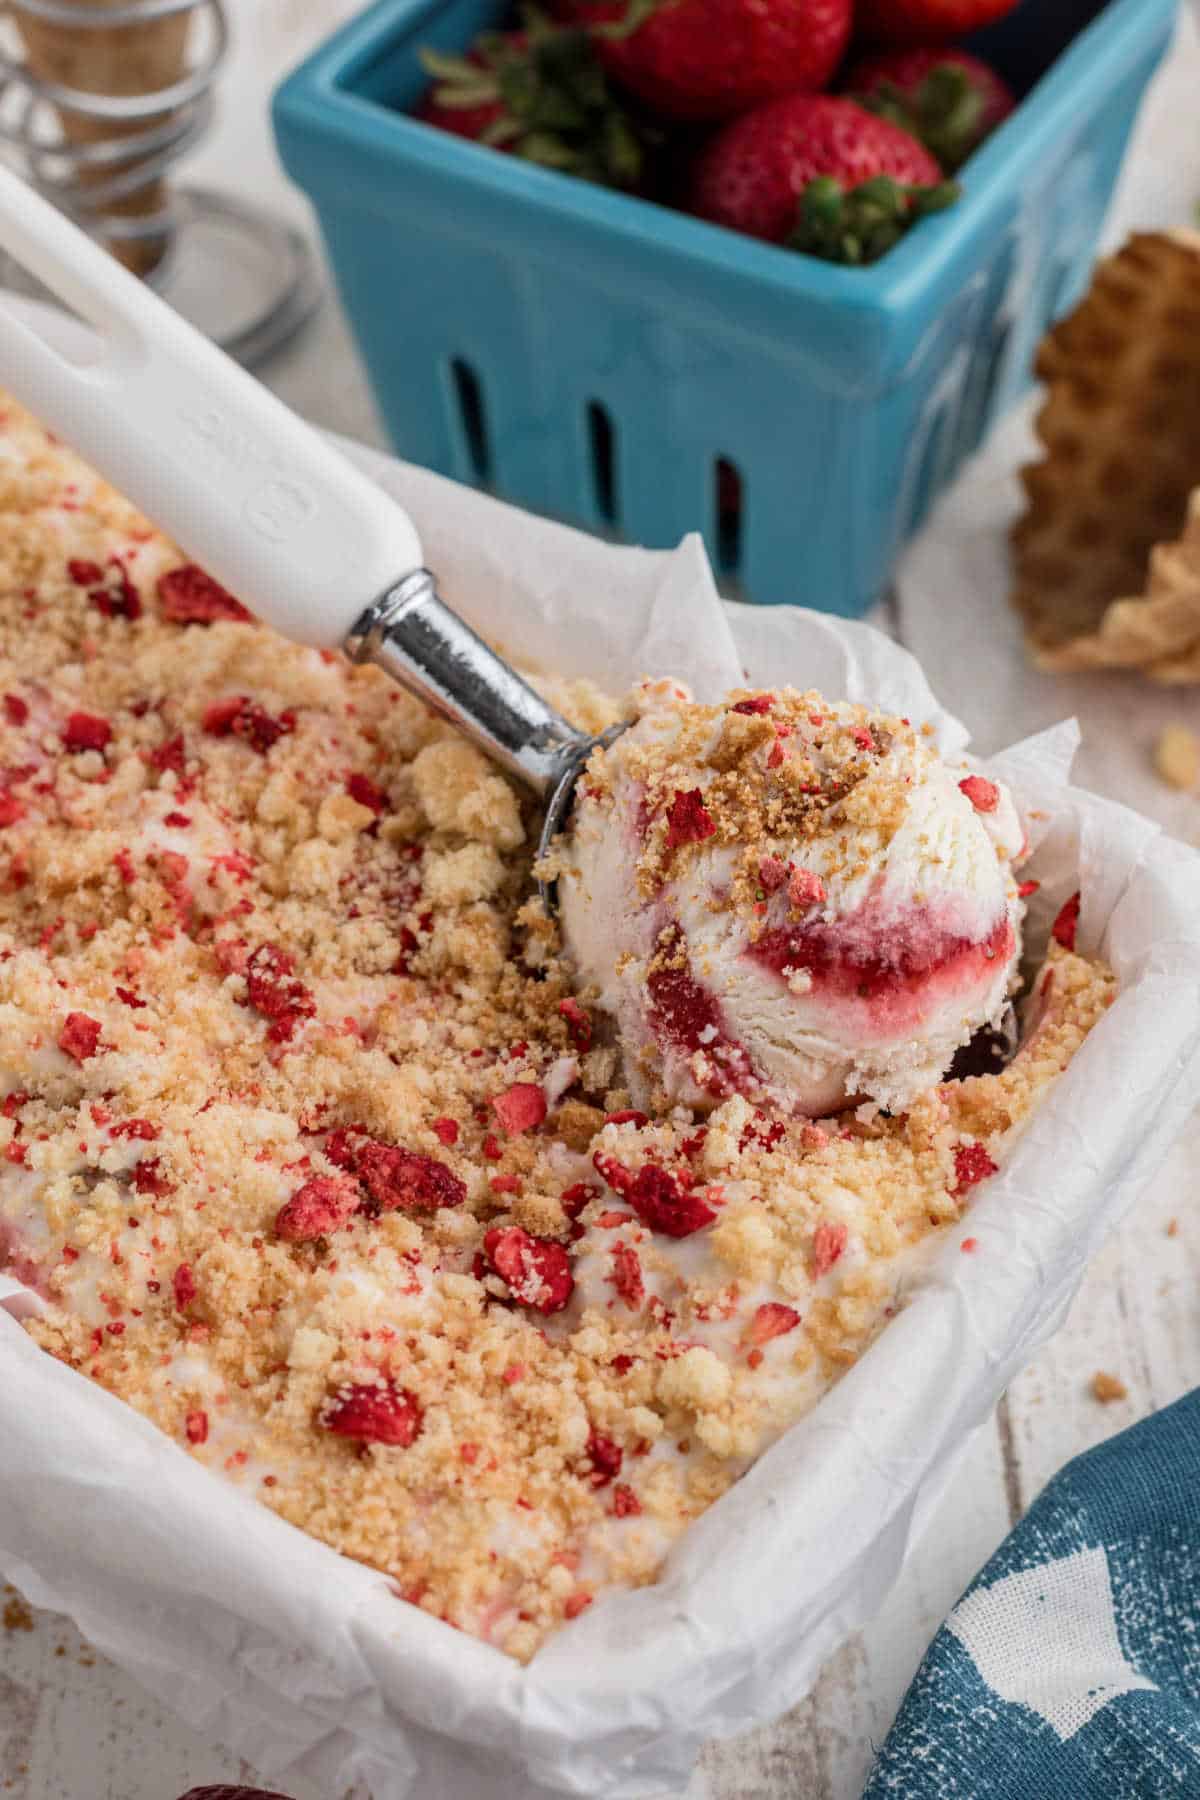 Picture of a loaf pan filled with strawberry shortcake ice cream with a scoop taking some out.